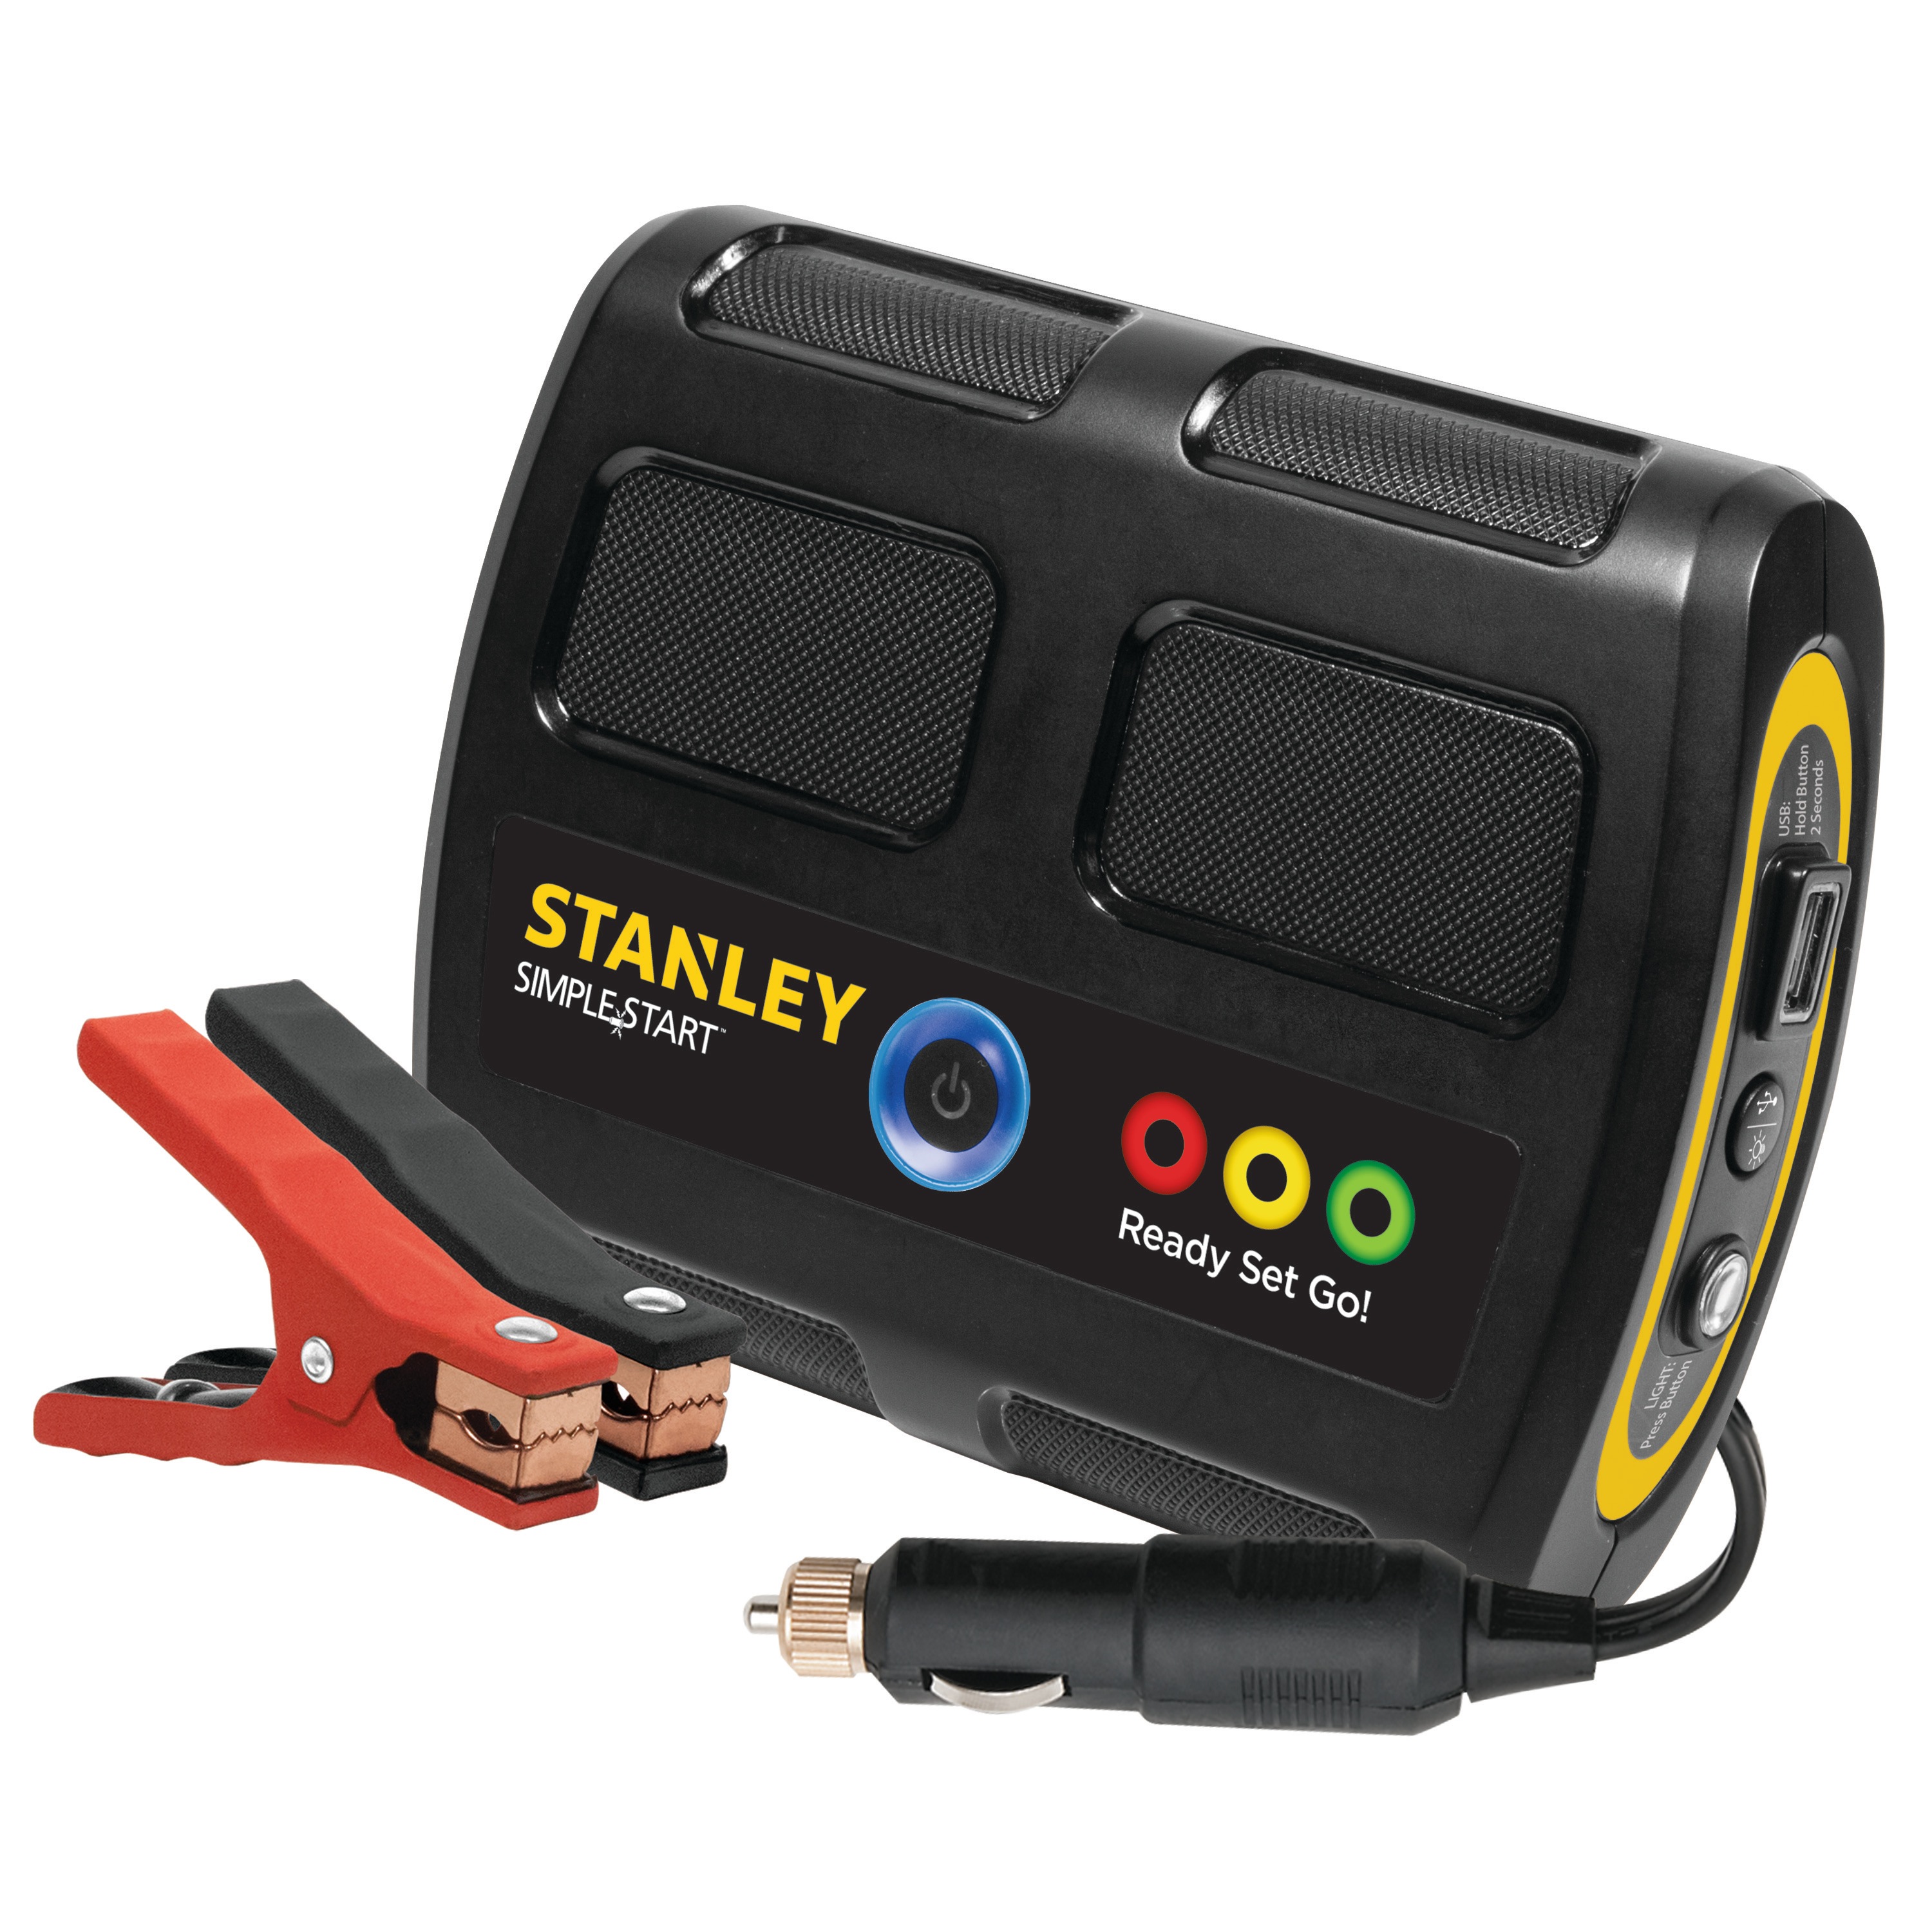 Simple Start™ Lithium Ion Battery Booster P2G7S STANLEY Tools